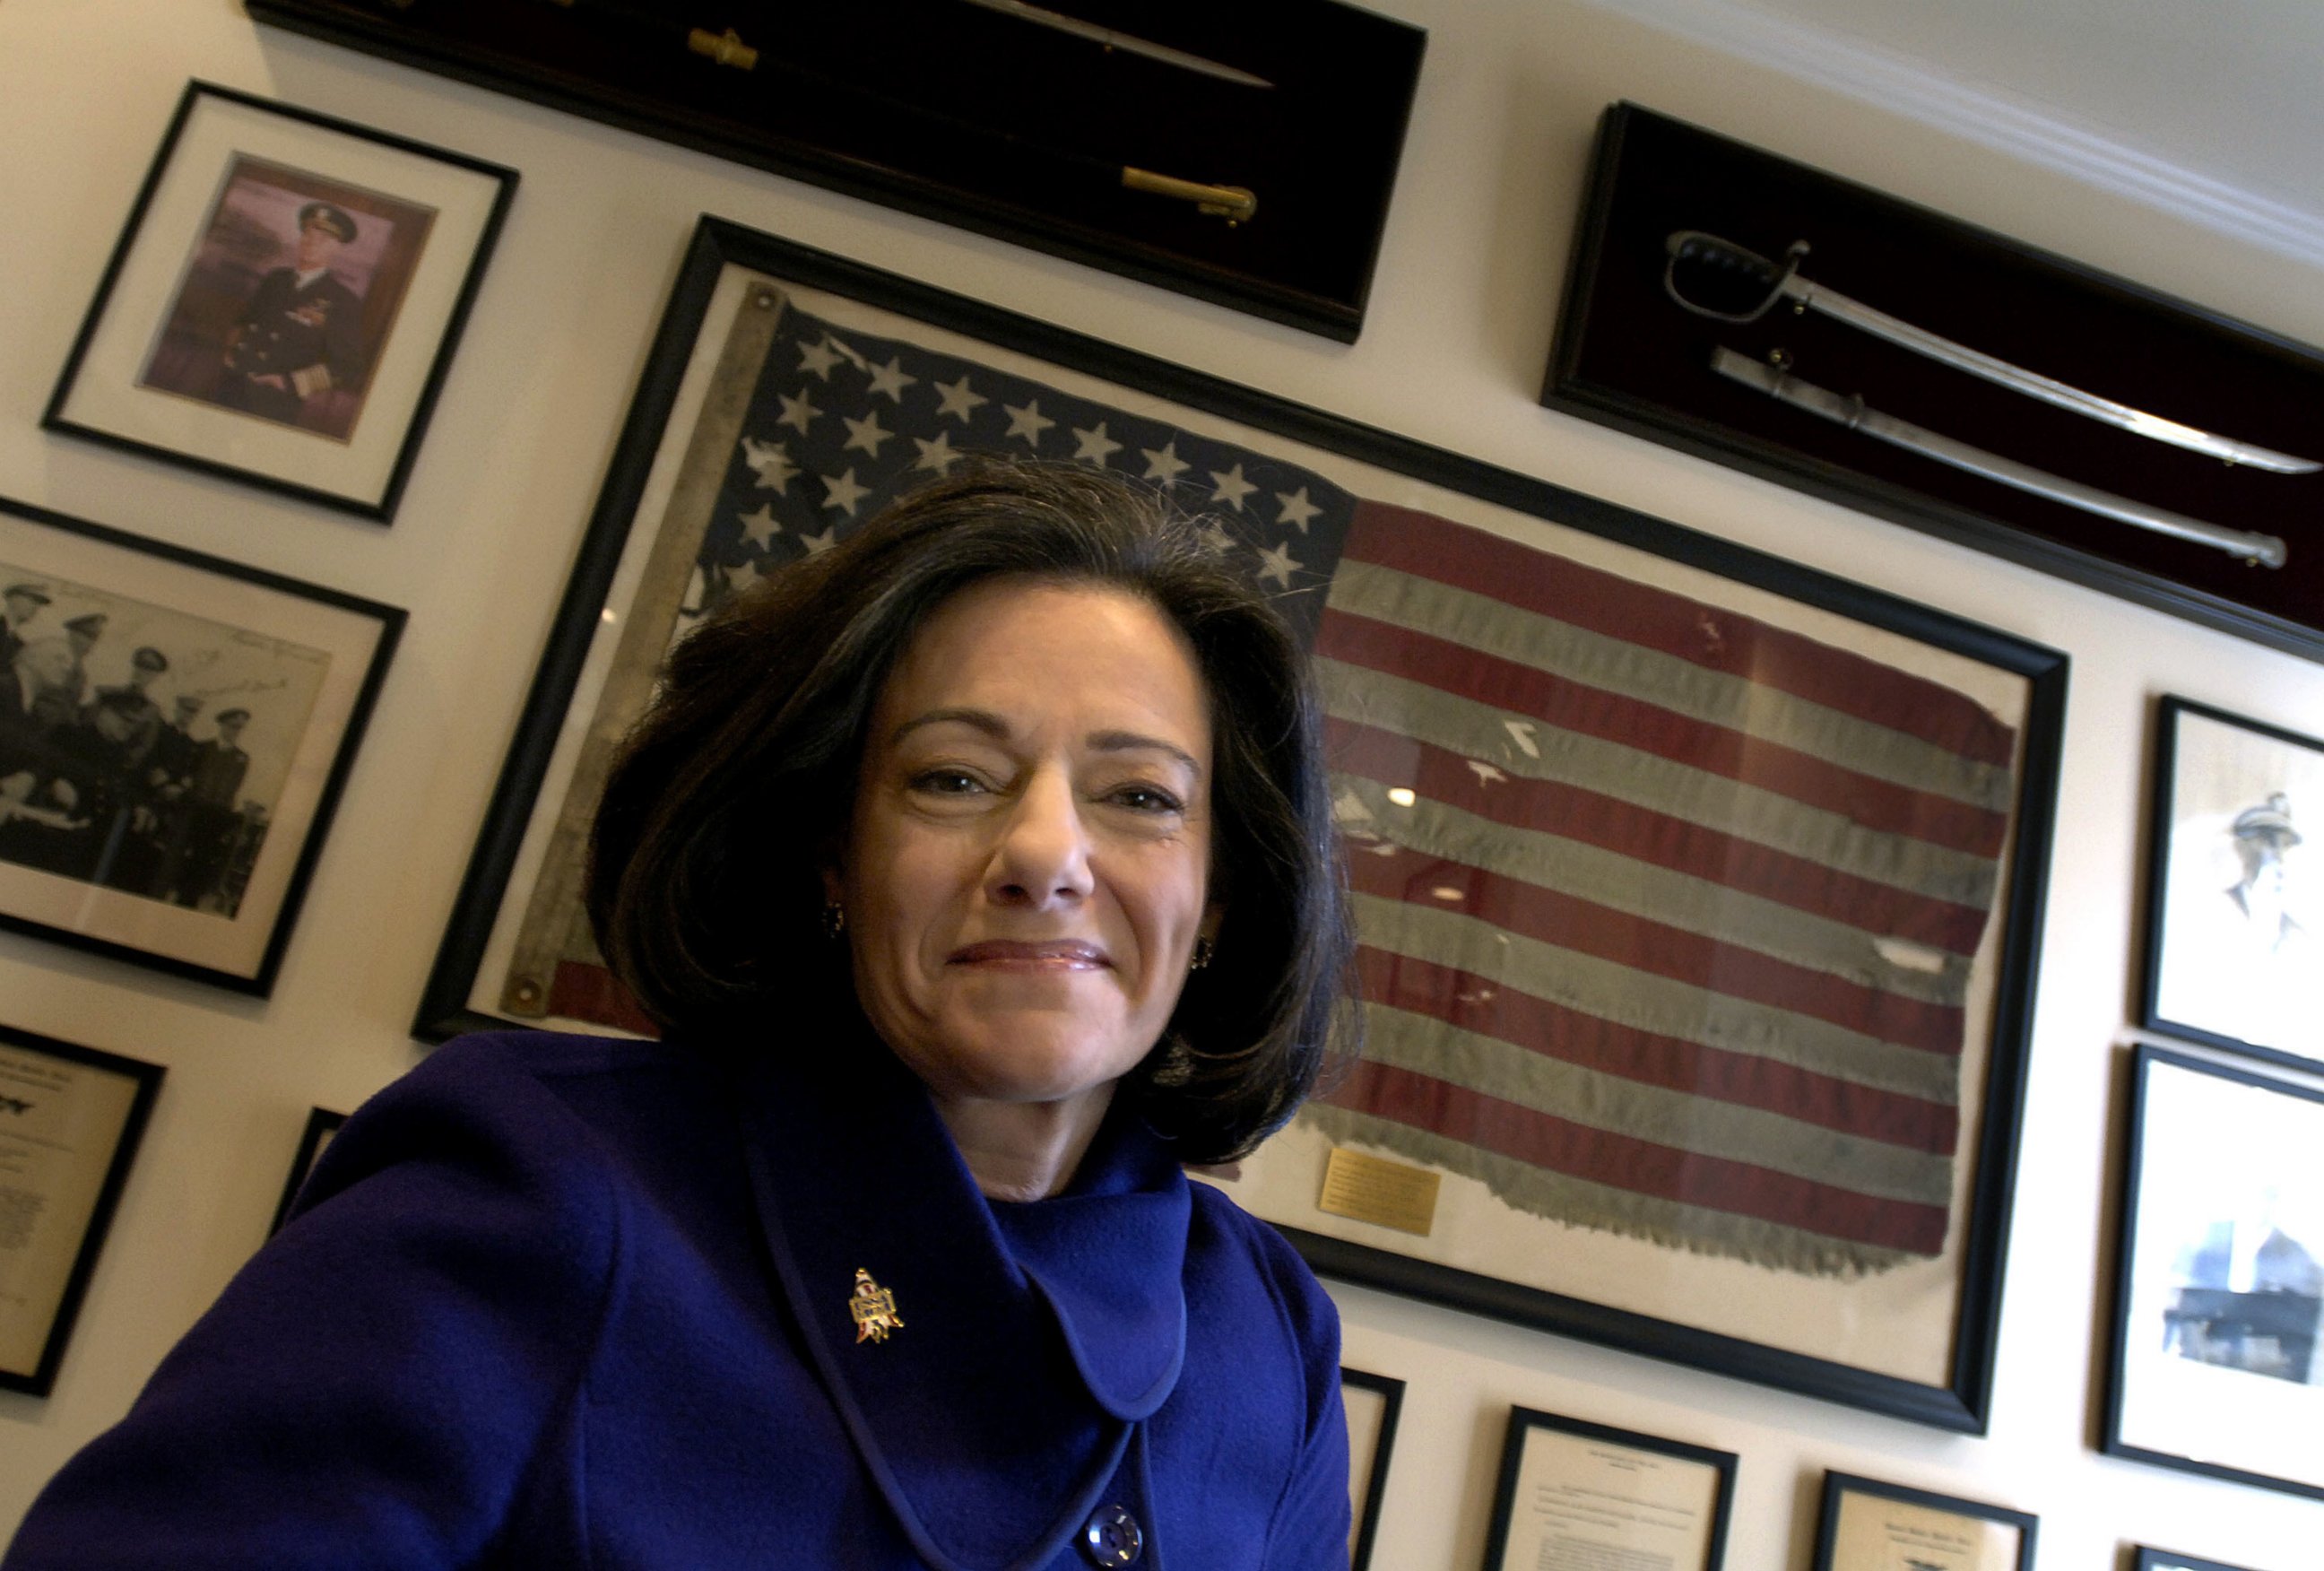 PHOTO: Kathleen "KT" McFarland is pictured at her home in New York, March 6, 2006. 